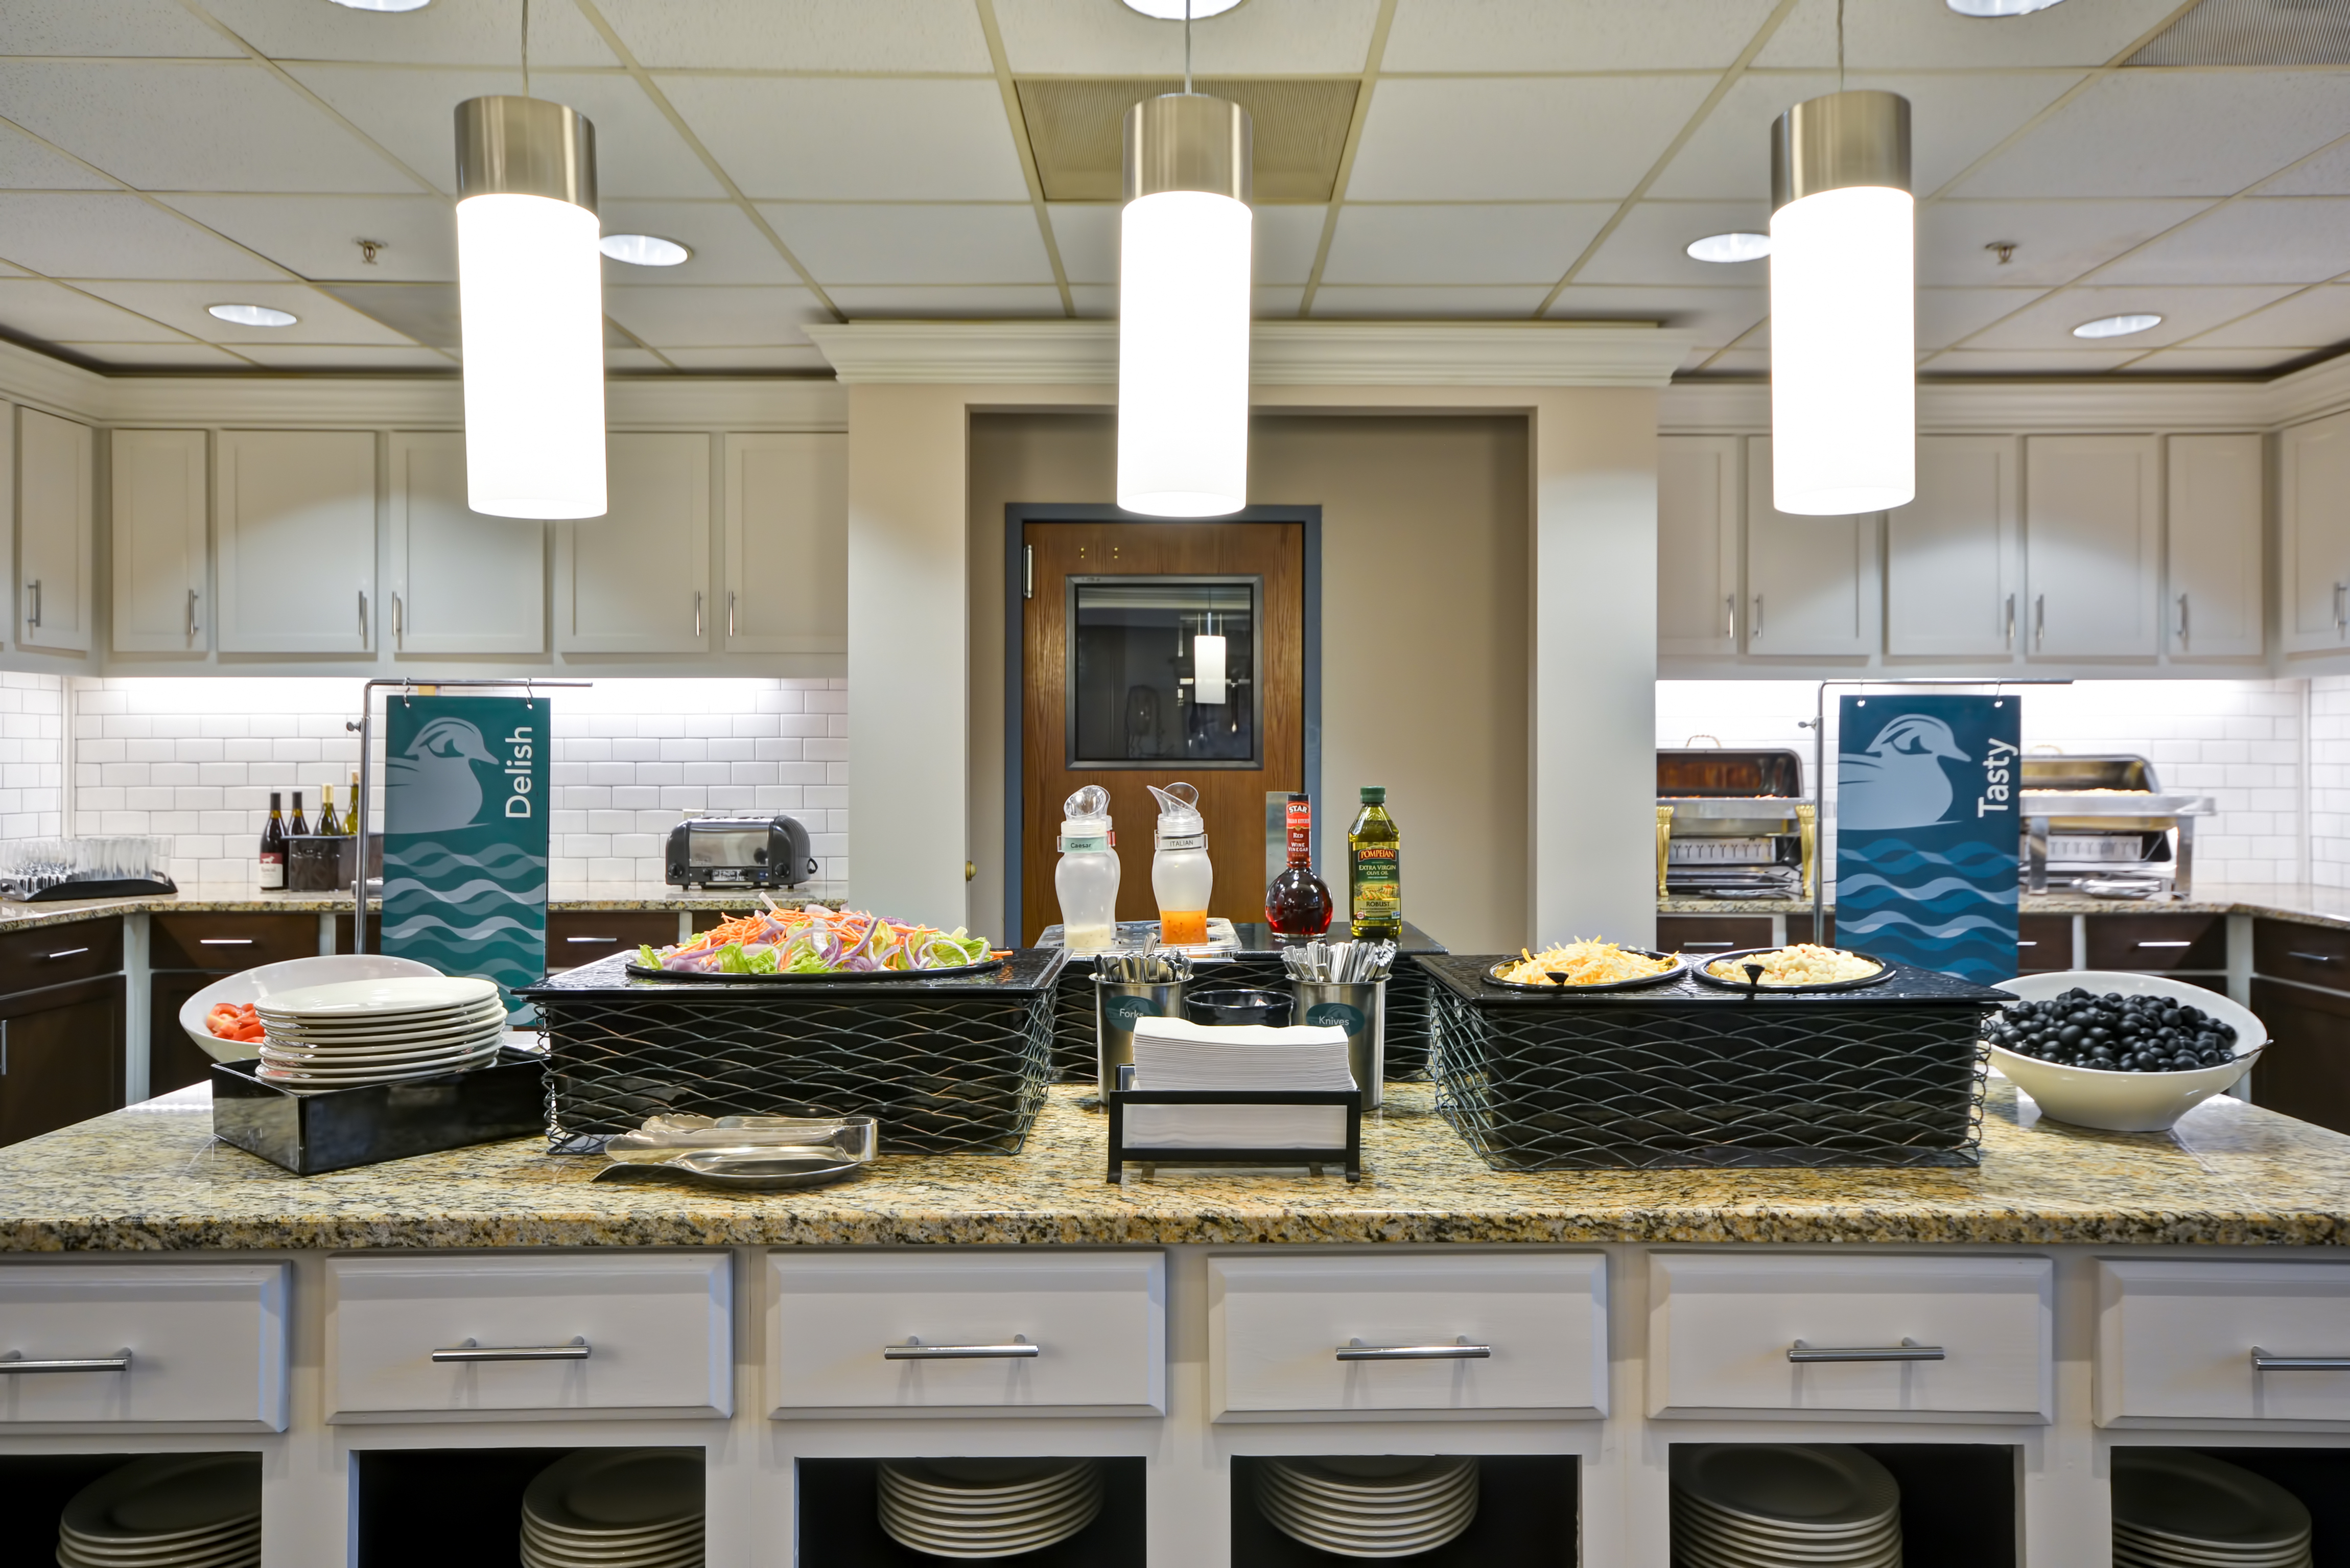 Dinner serving area with buffet trays, food and wine selections, and dining amenities